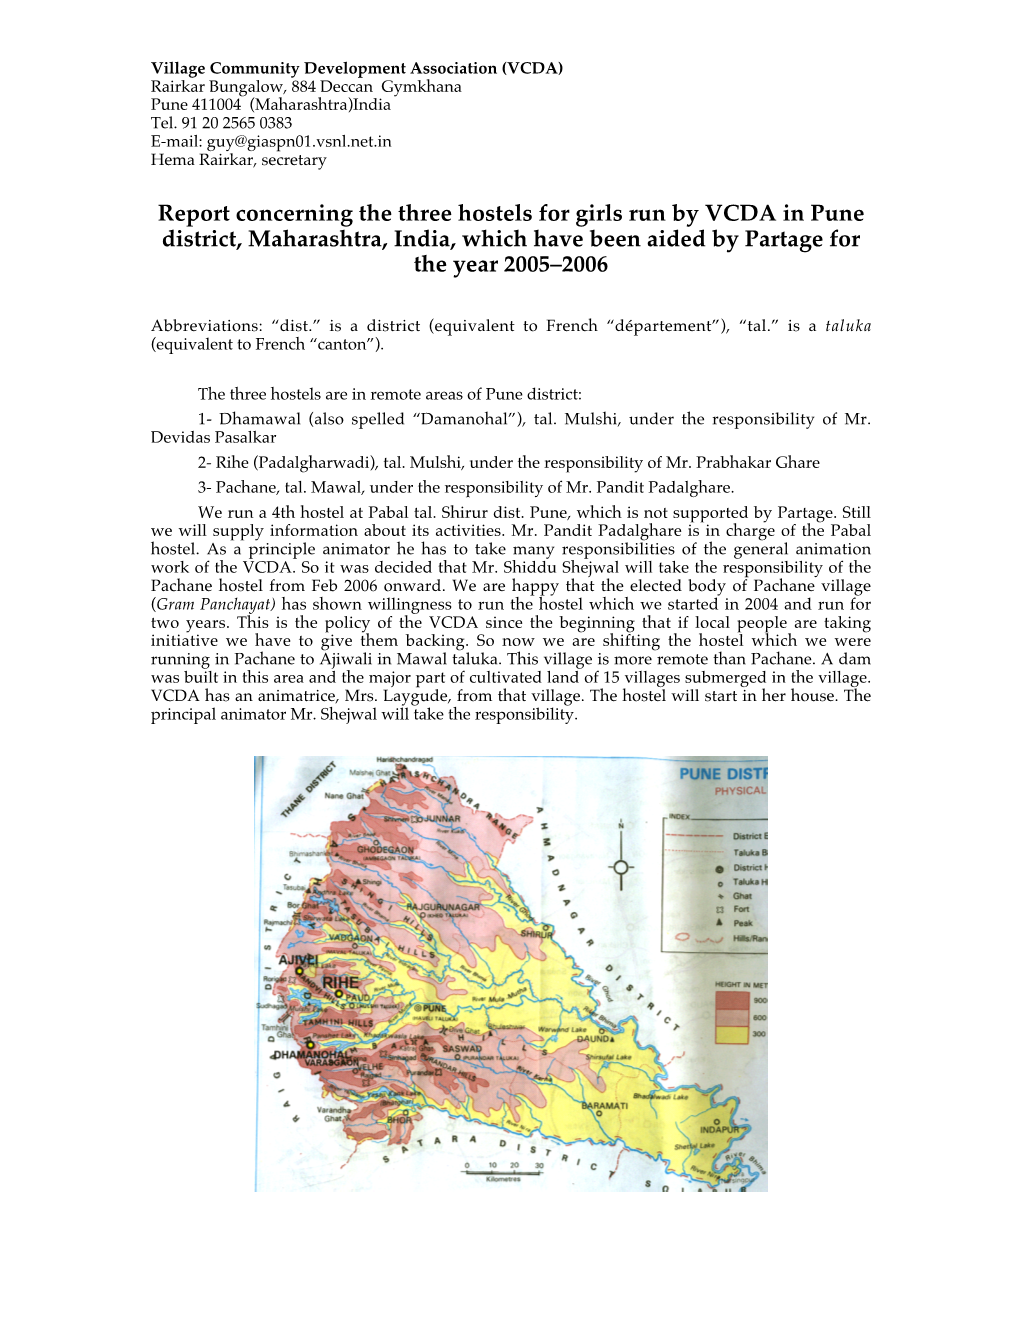 Report Concerning the Three Hostels for Girls Run by VCDA in Pune District, Maharashtra, India, Which Have Been Aided by Partage for the Year 2005–2006